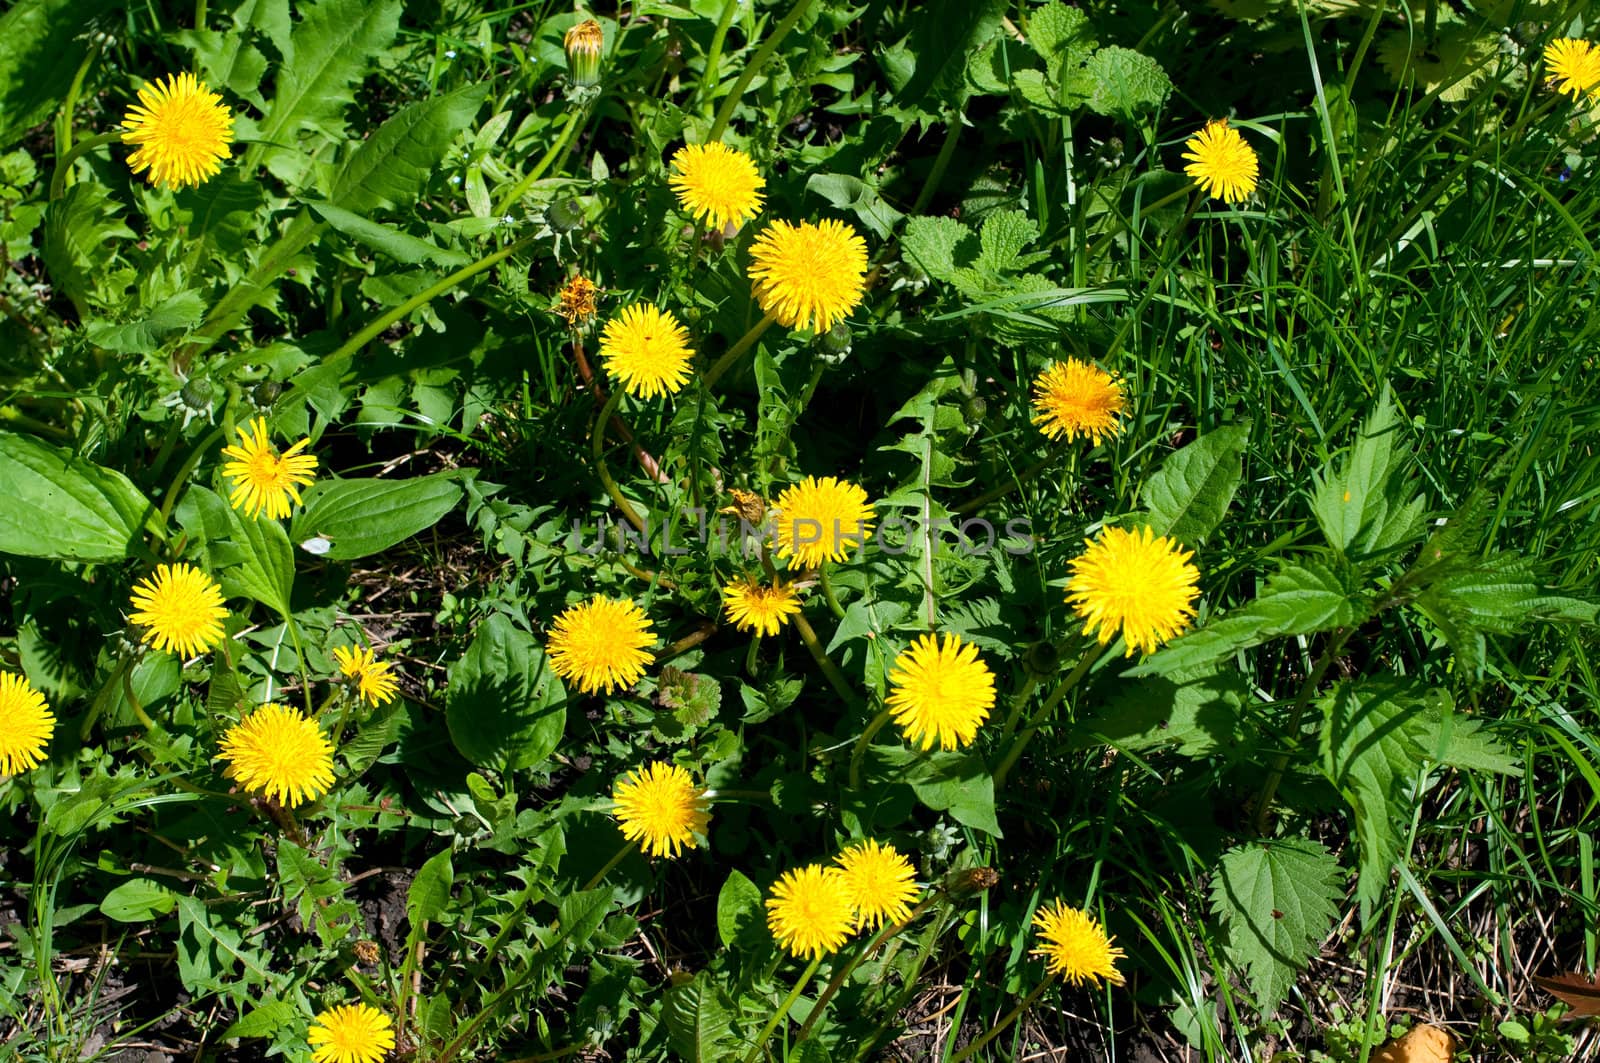 Flowering meadow with yellow flowers in summer